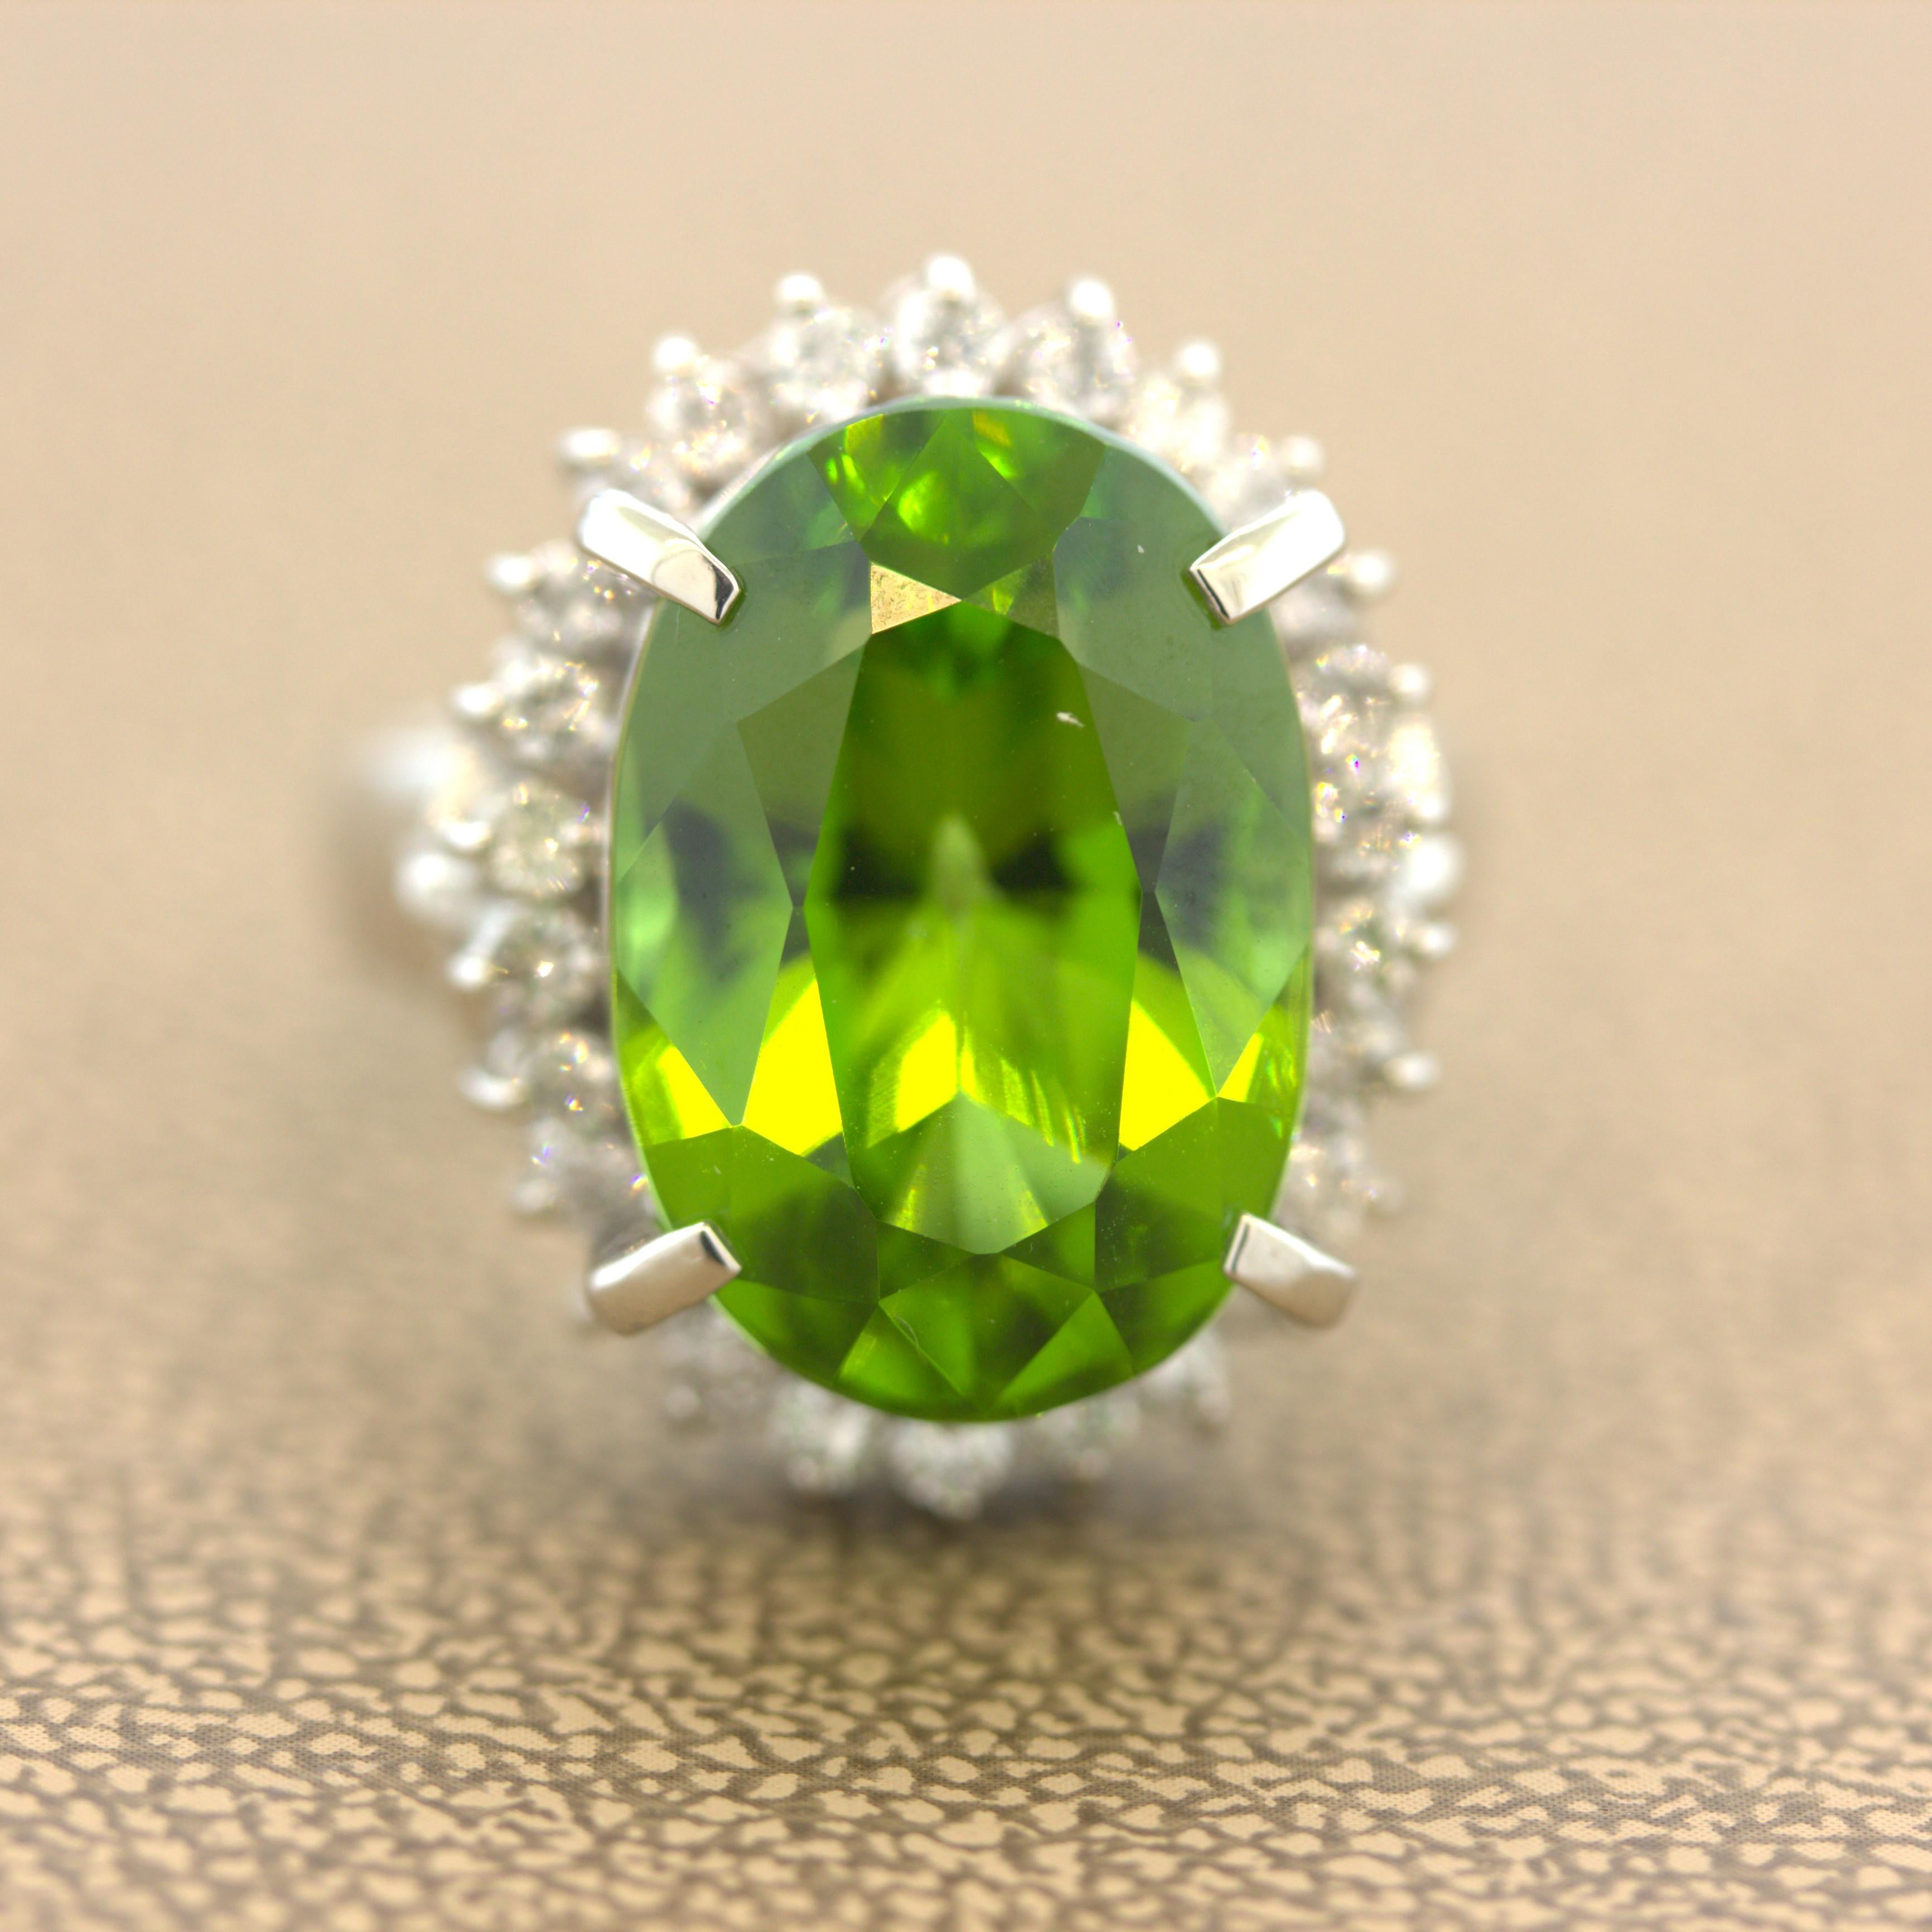 A simple yet elegant platinum ring featuring a fine gem quality peridot with excellent color and clarity. The peridot weighs 14.19 carats and has a super bright and rich green color. Adding to that, the stone is completely eye clean with no visible